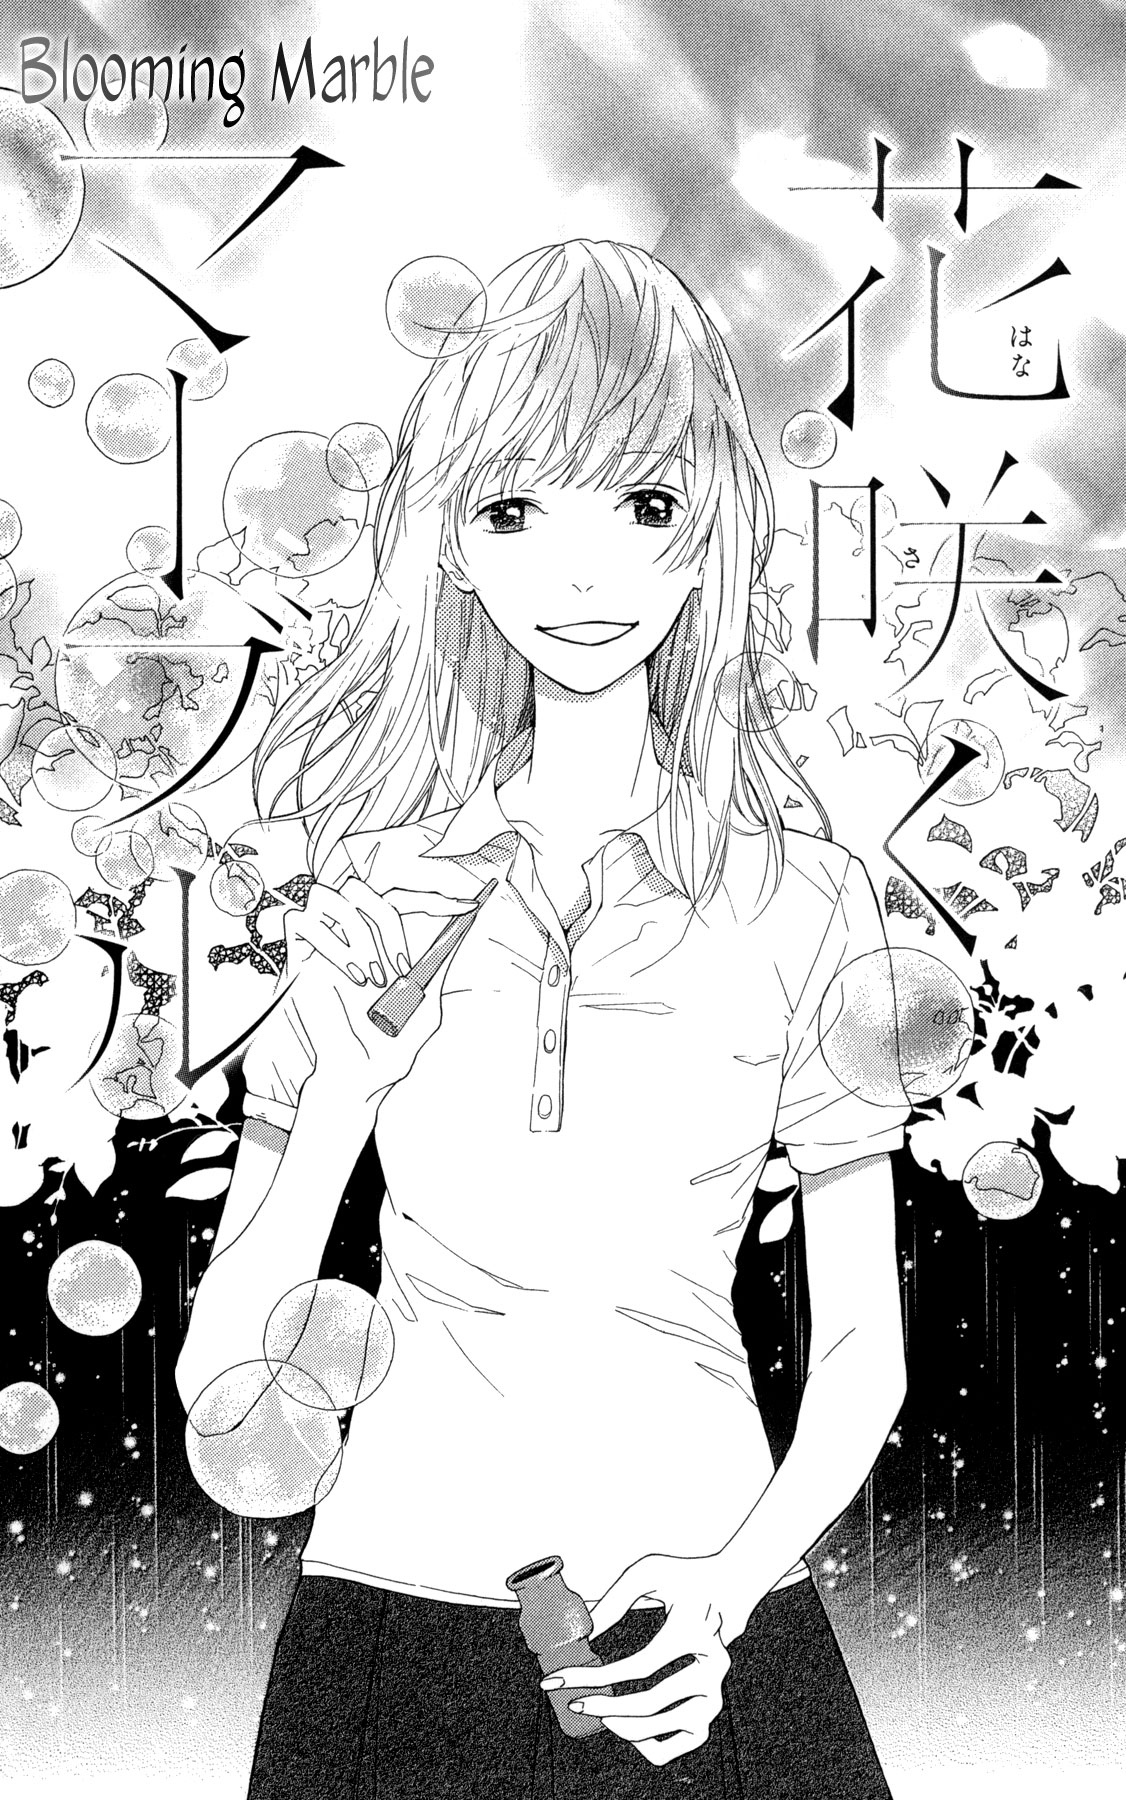 The Shaft Of Light In The Blue Vol.1 Chapter 4: Blooming Marble - Picture 2